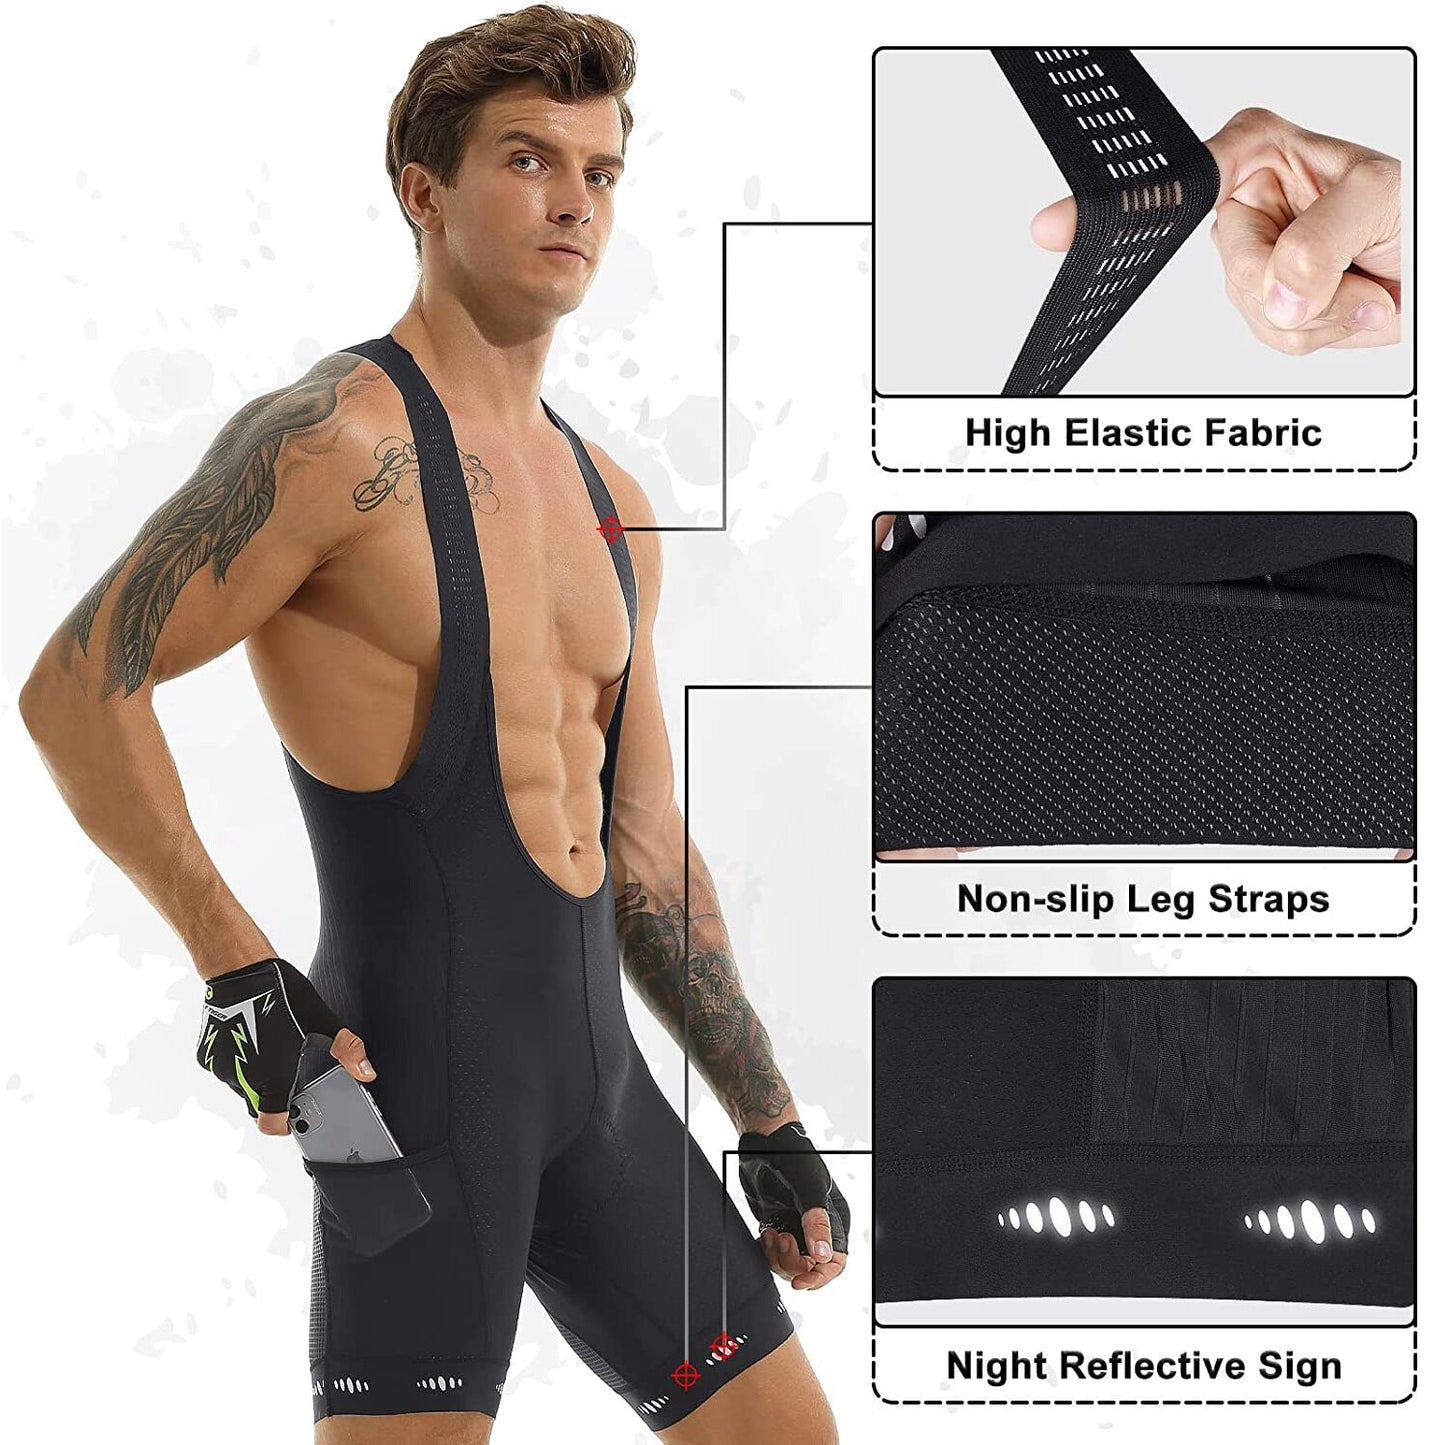 X-Tiger Men&#39;s Cycling Bib Shorts With Pocket UPF 50+ Latest Generation Quick-dry Polyester Competitive Edition Series Bib Shorts